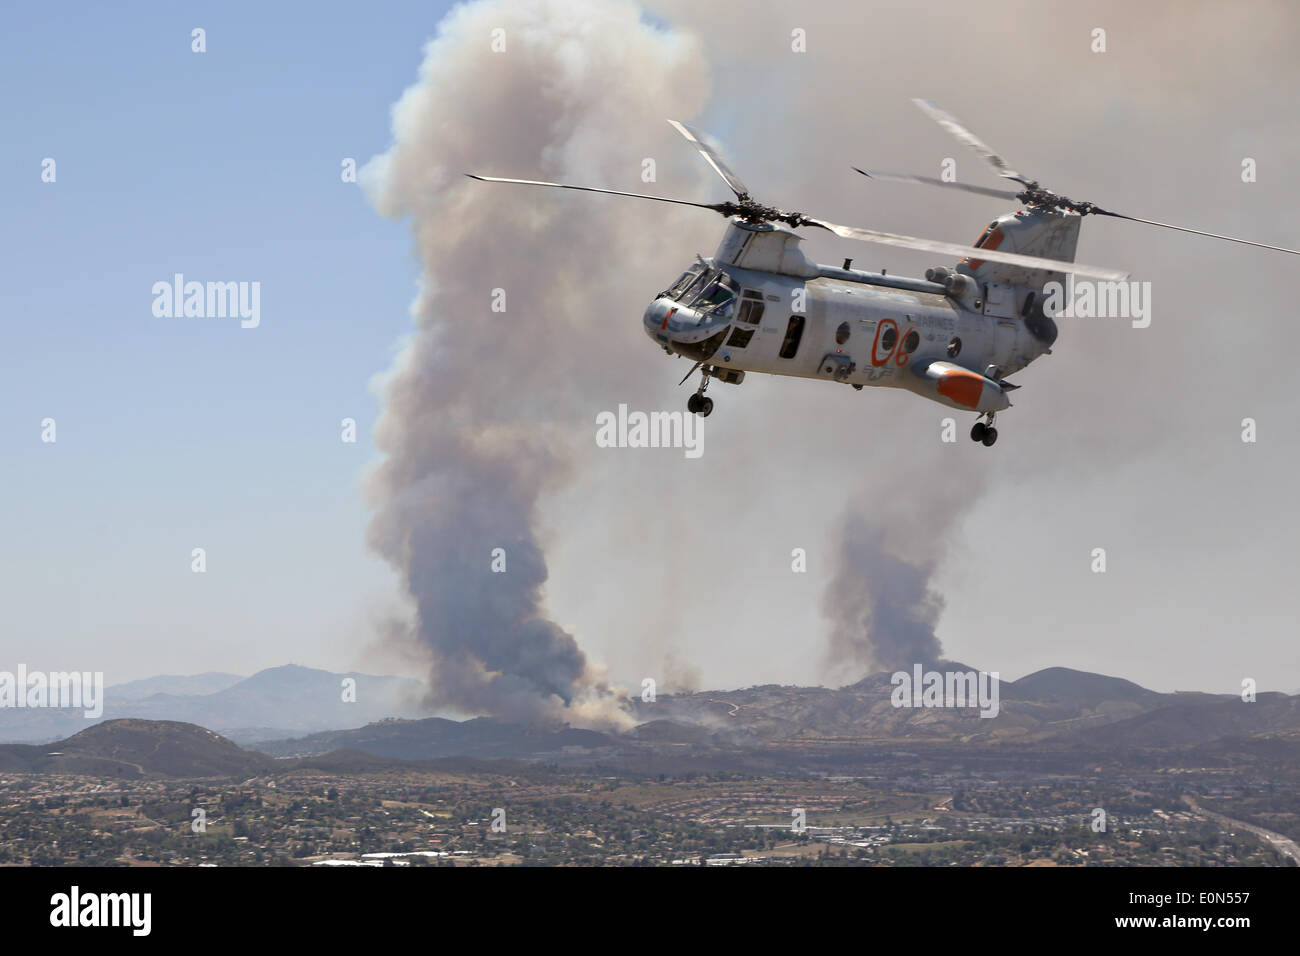 A US Marine Corps CH-46 Sea Knight helicopter help fight the Cocos wildfire as it burns the foothills destroying home May 15, 2014 around San Marcos, California.  Evacuations forced more than 13,000 people from their homes as the fire burned across San Diego County. Stock Photo